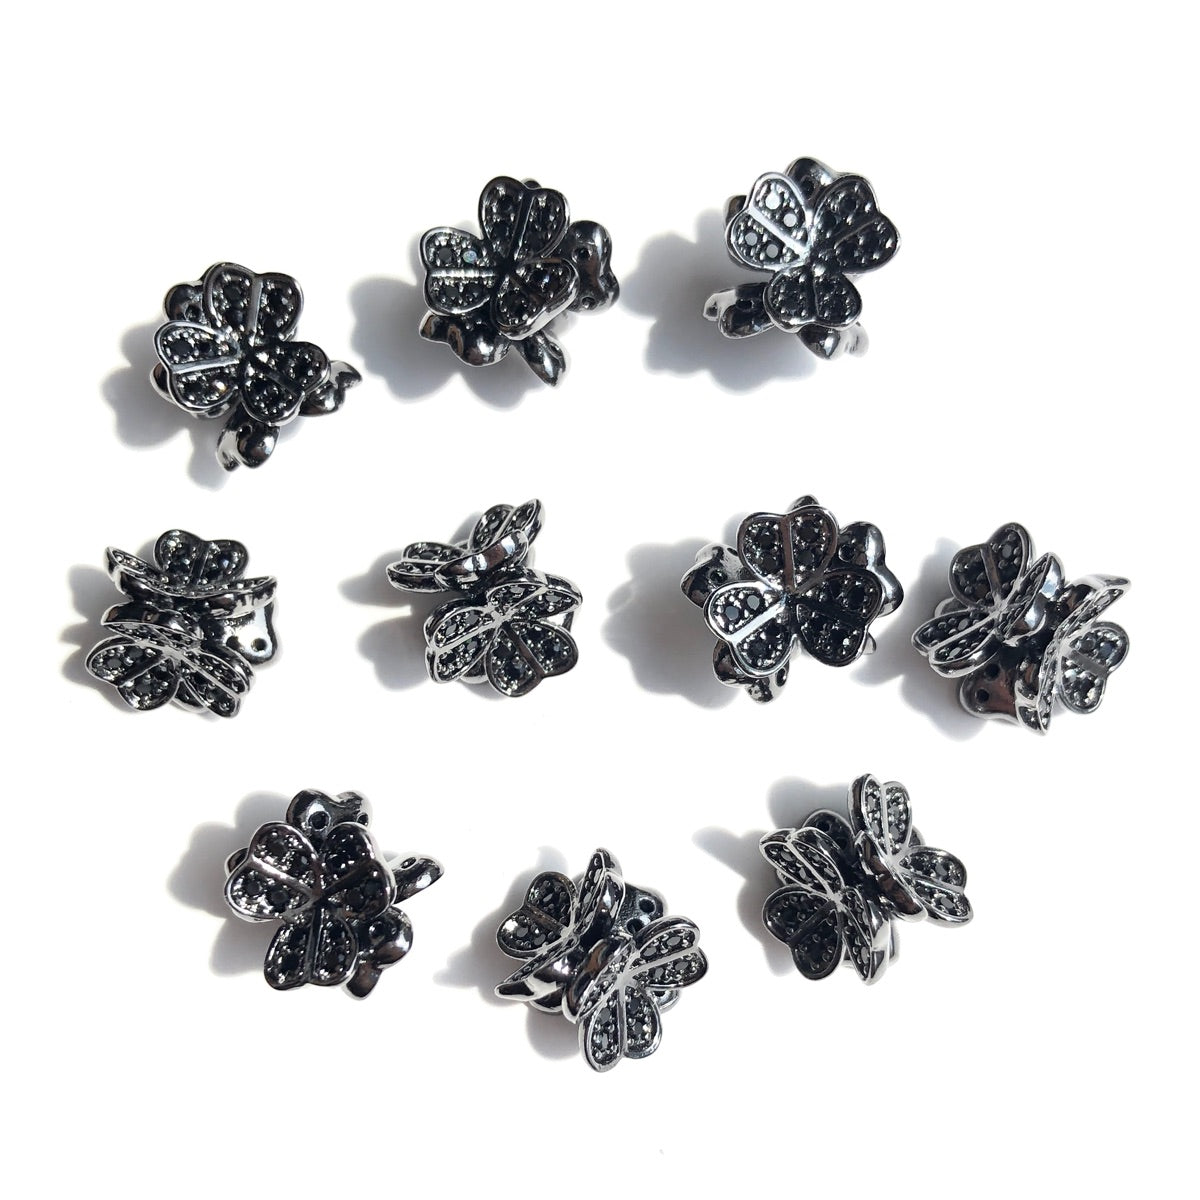 10-20-50pcs/lot 9mm CZ Paved Clover Flower Spacers Black on Black CZ Paved Spacers New Spacers Arrivals Wholesale Charms Beads Beyond